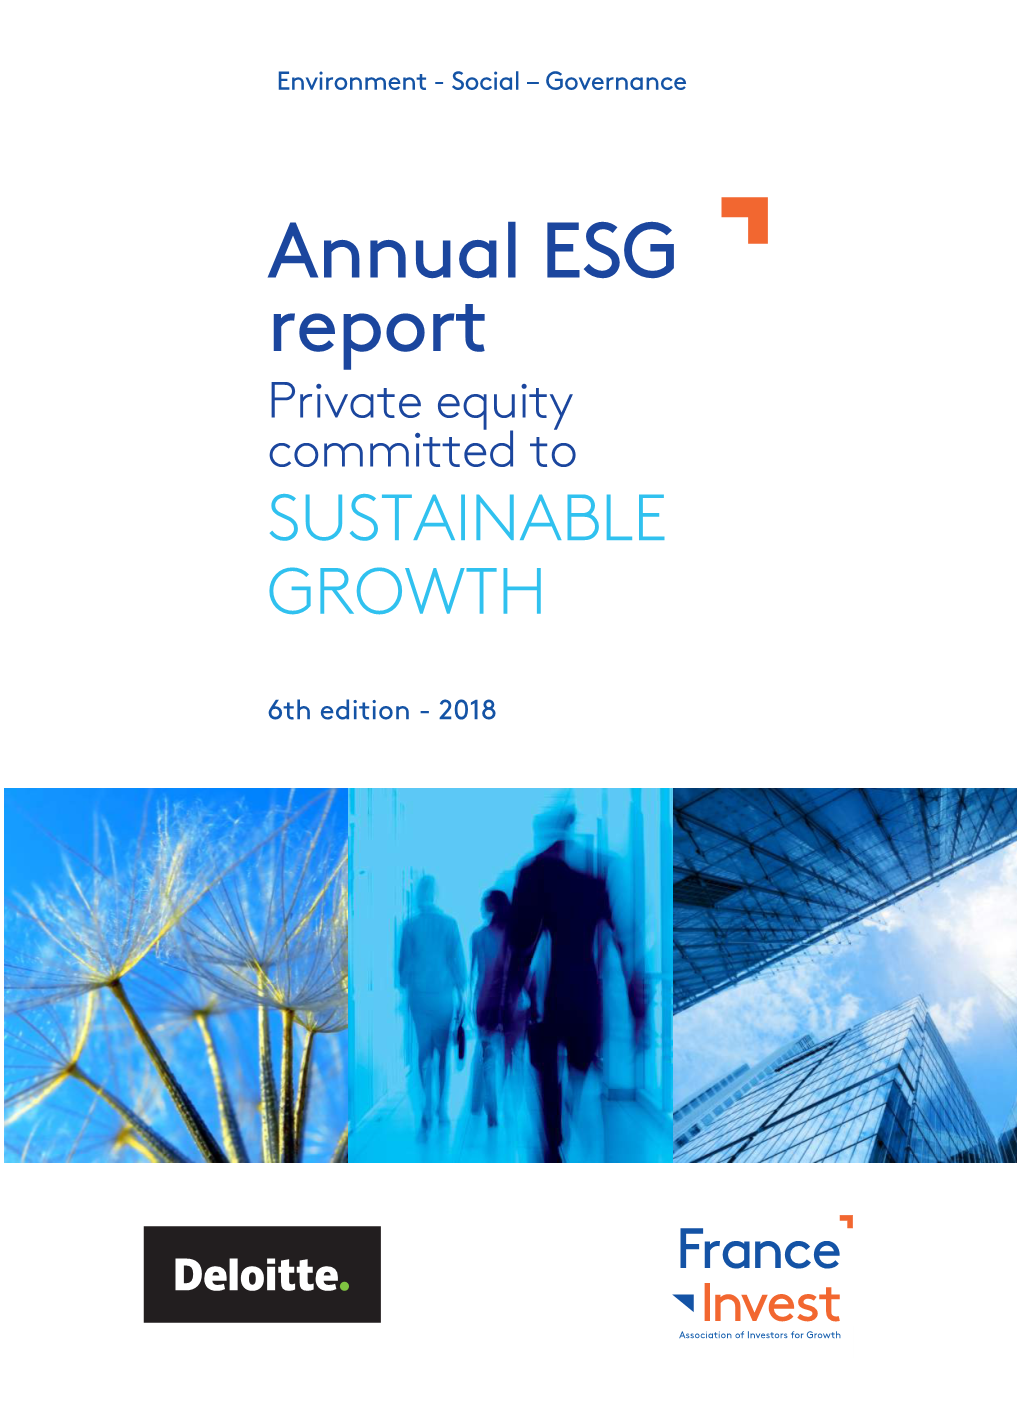 Annual ESG Report Private Equity Committed to SUSTAINABLE GROWTH